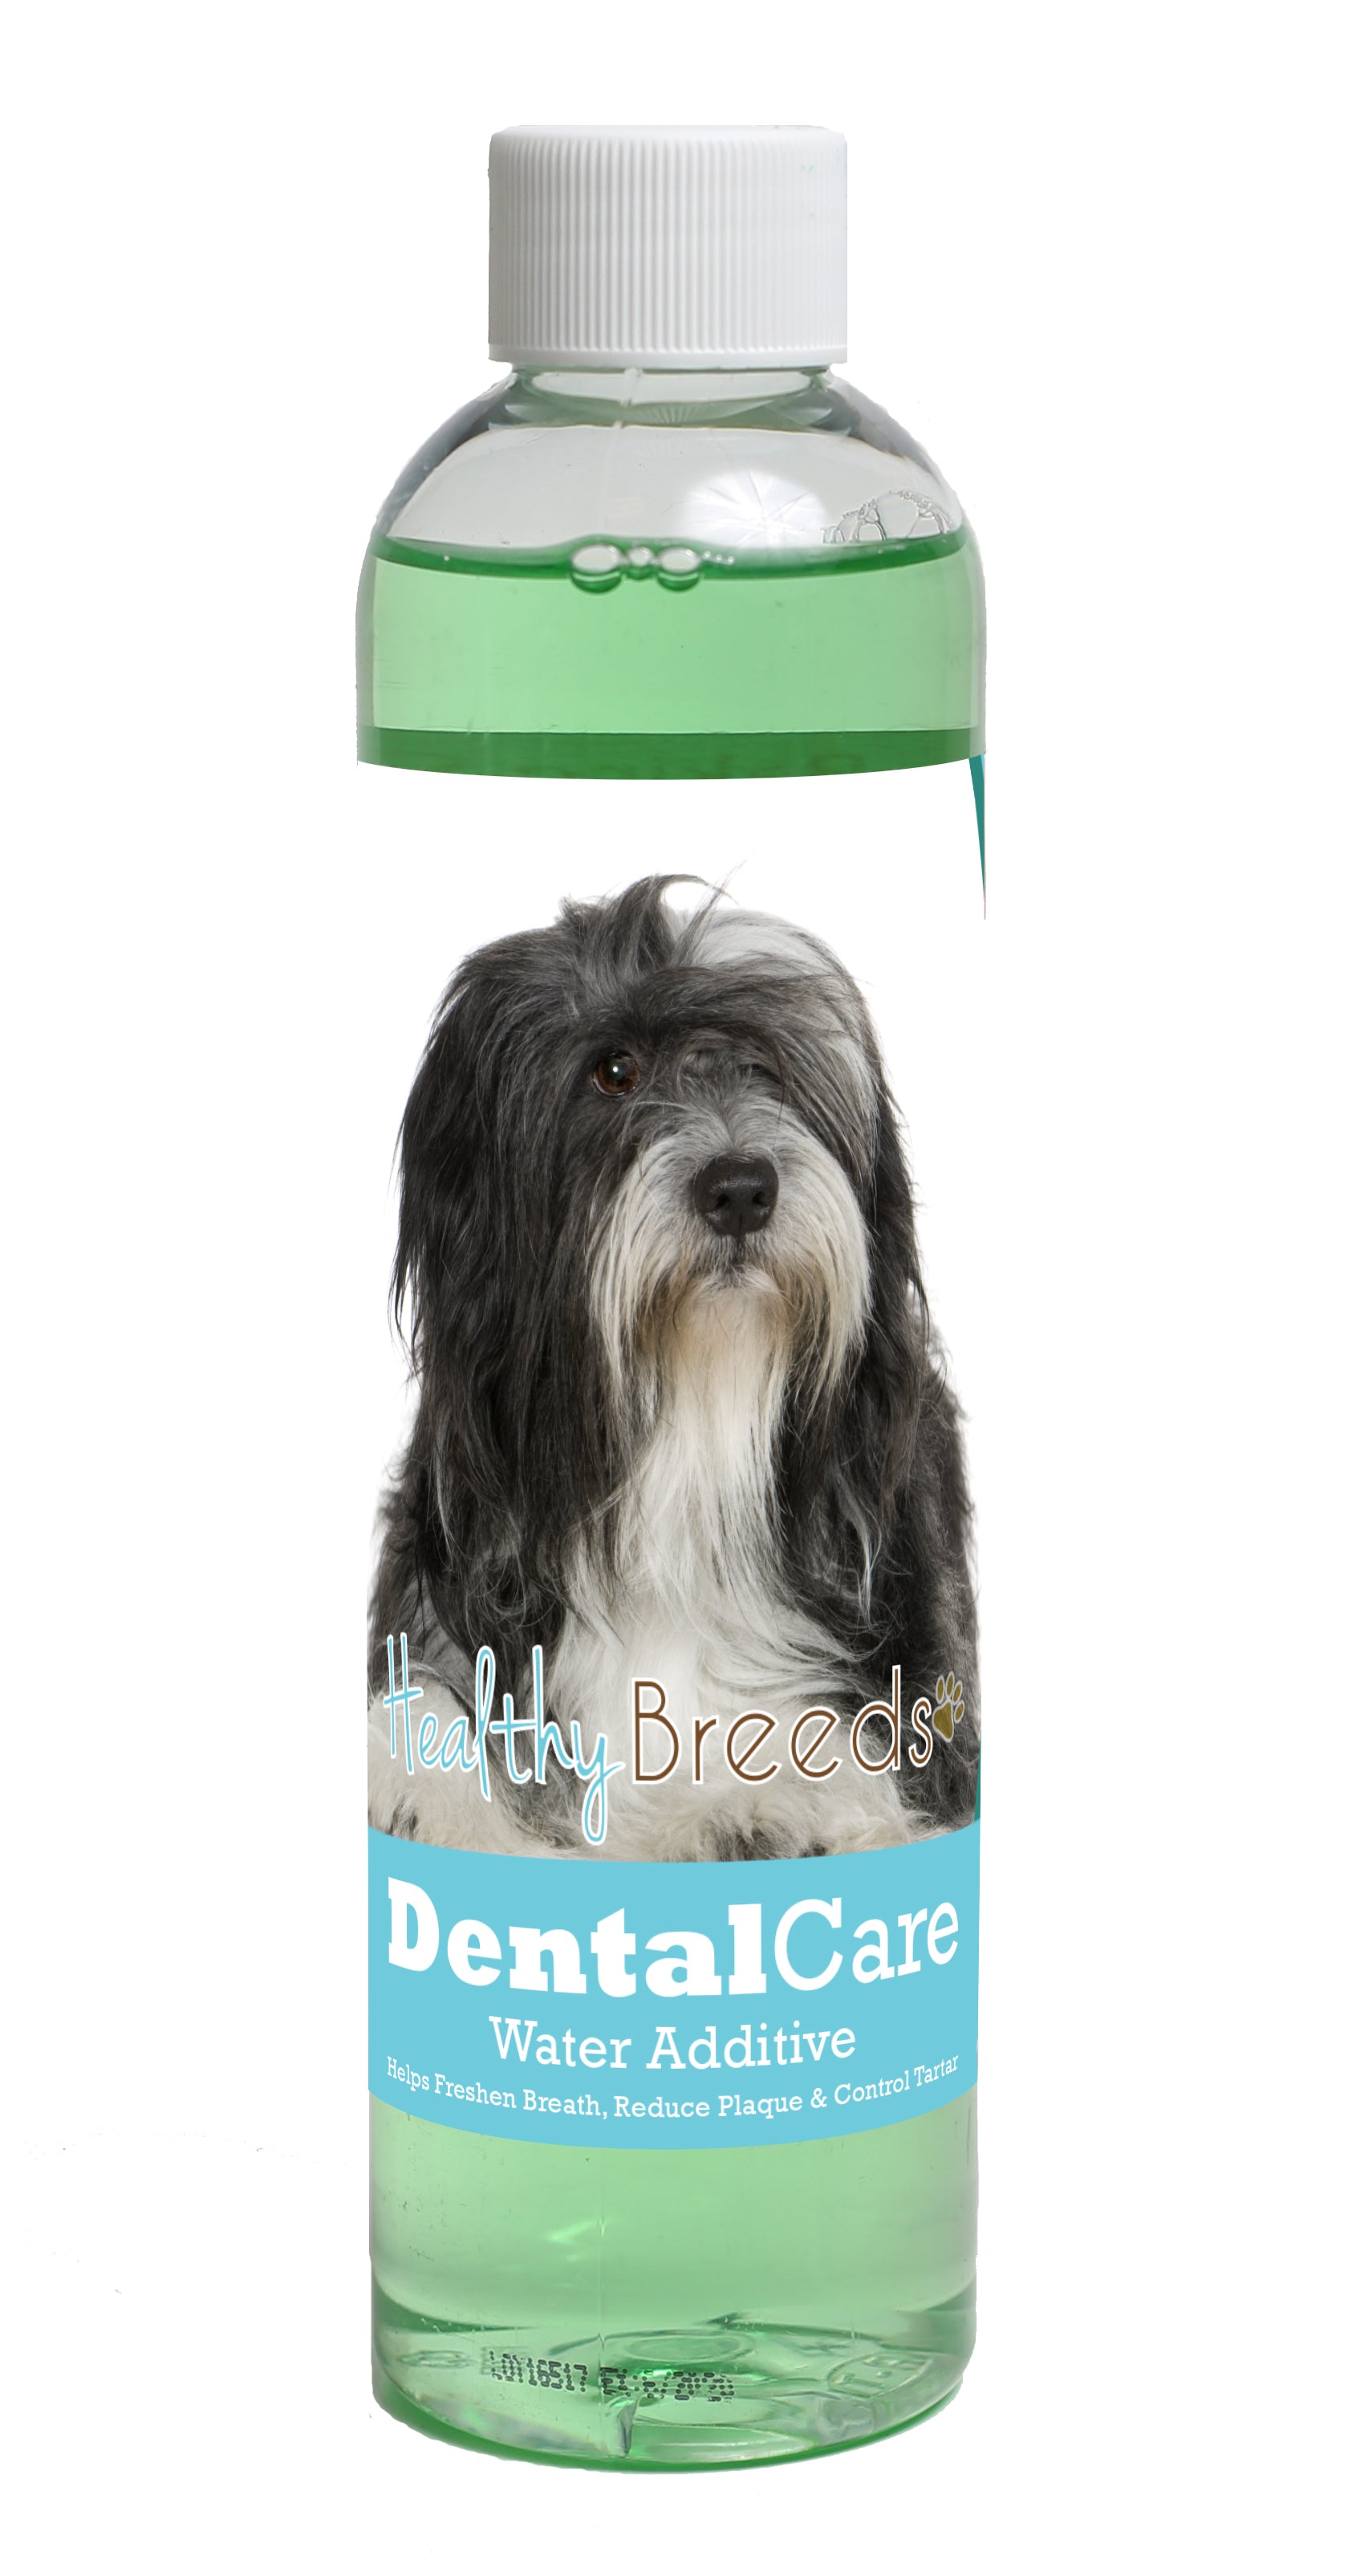 Lhasa Apso Dental Rinse for Dogs 8 oz